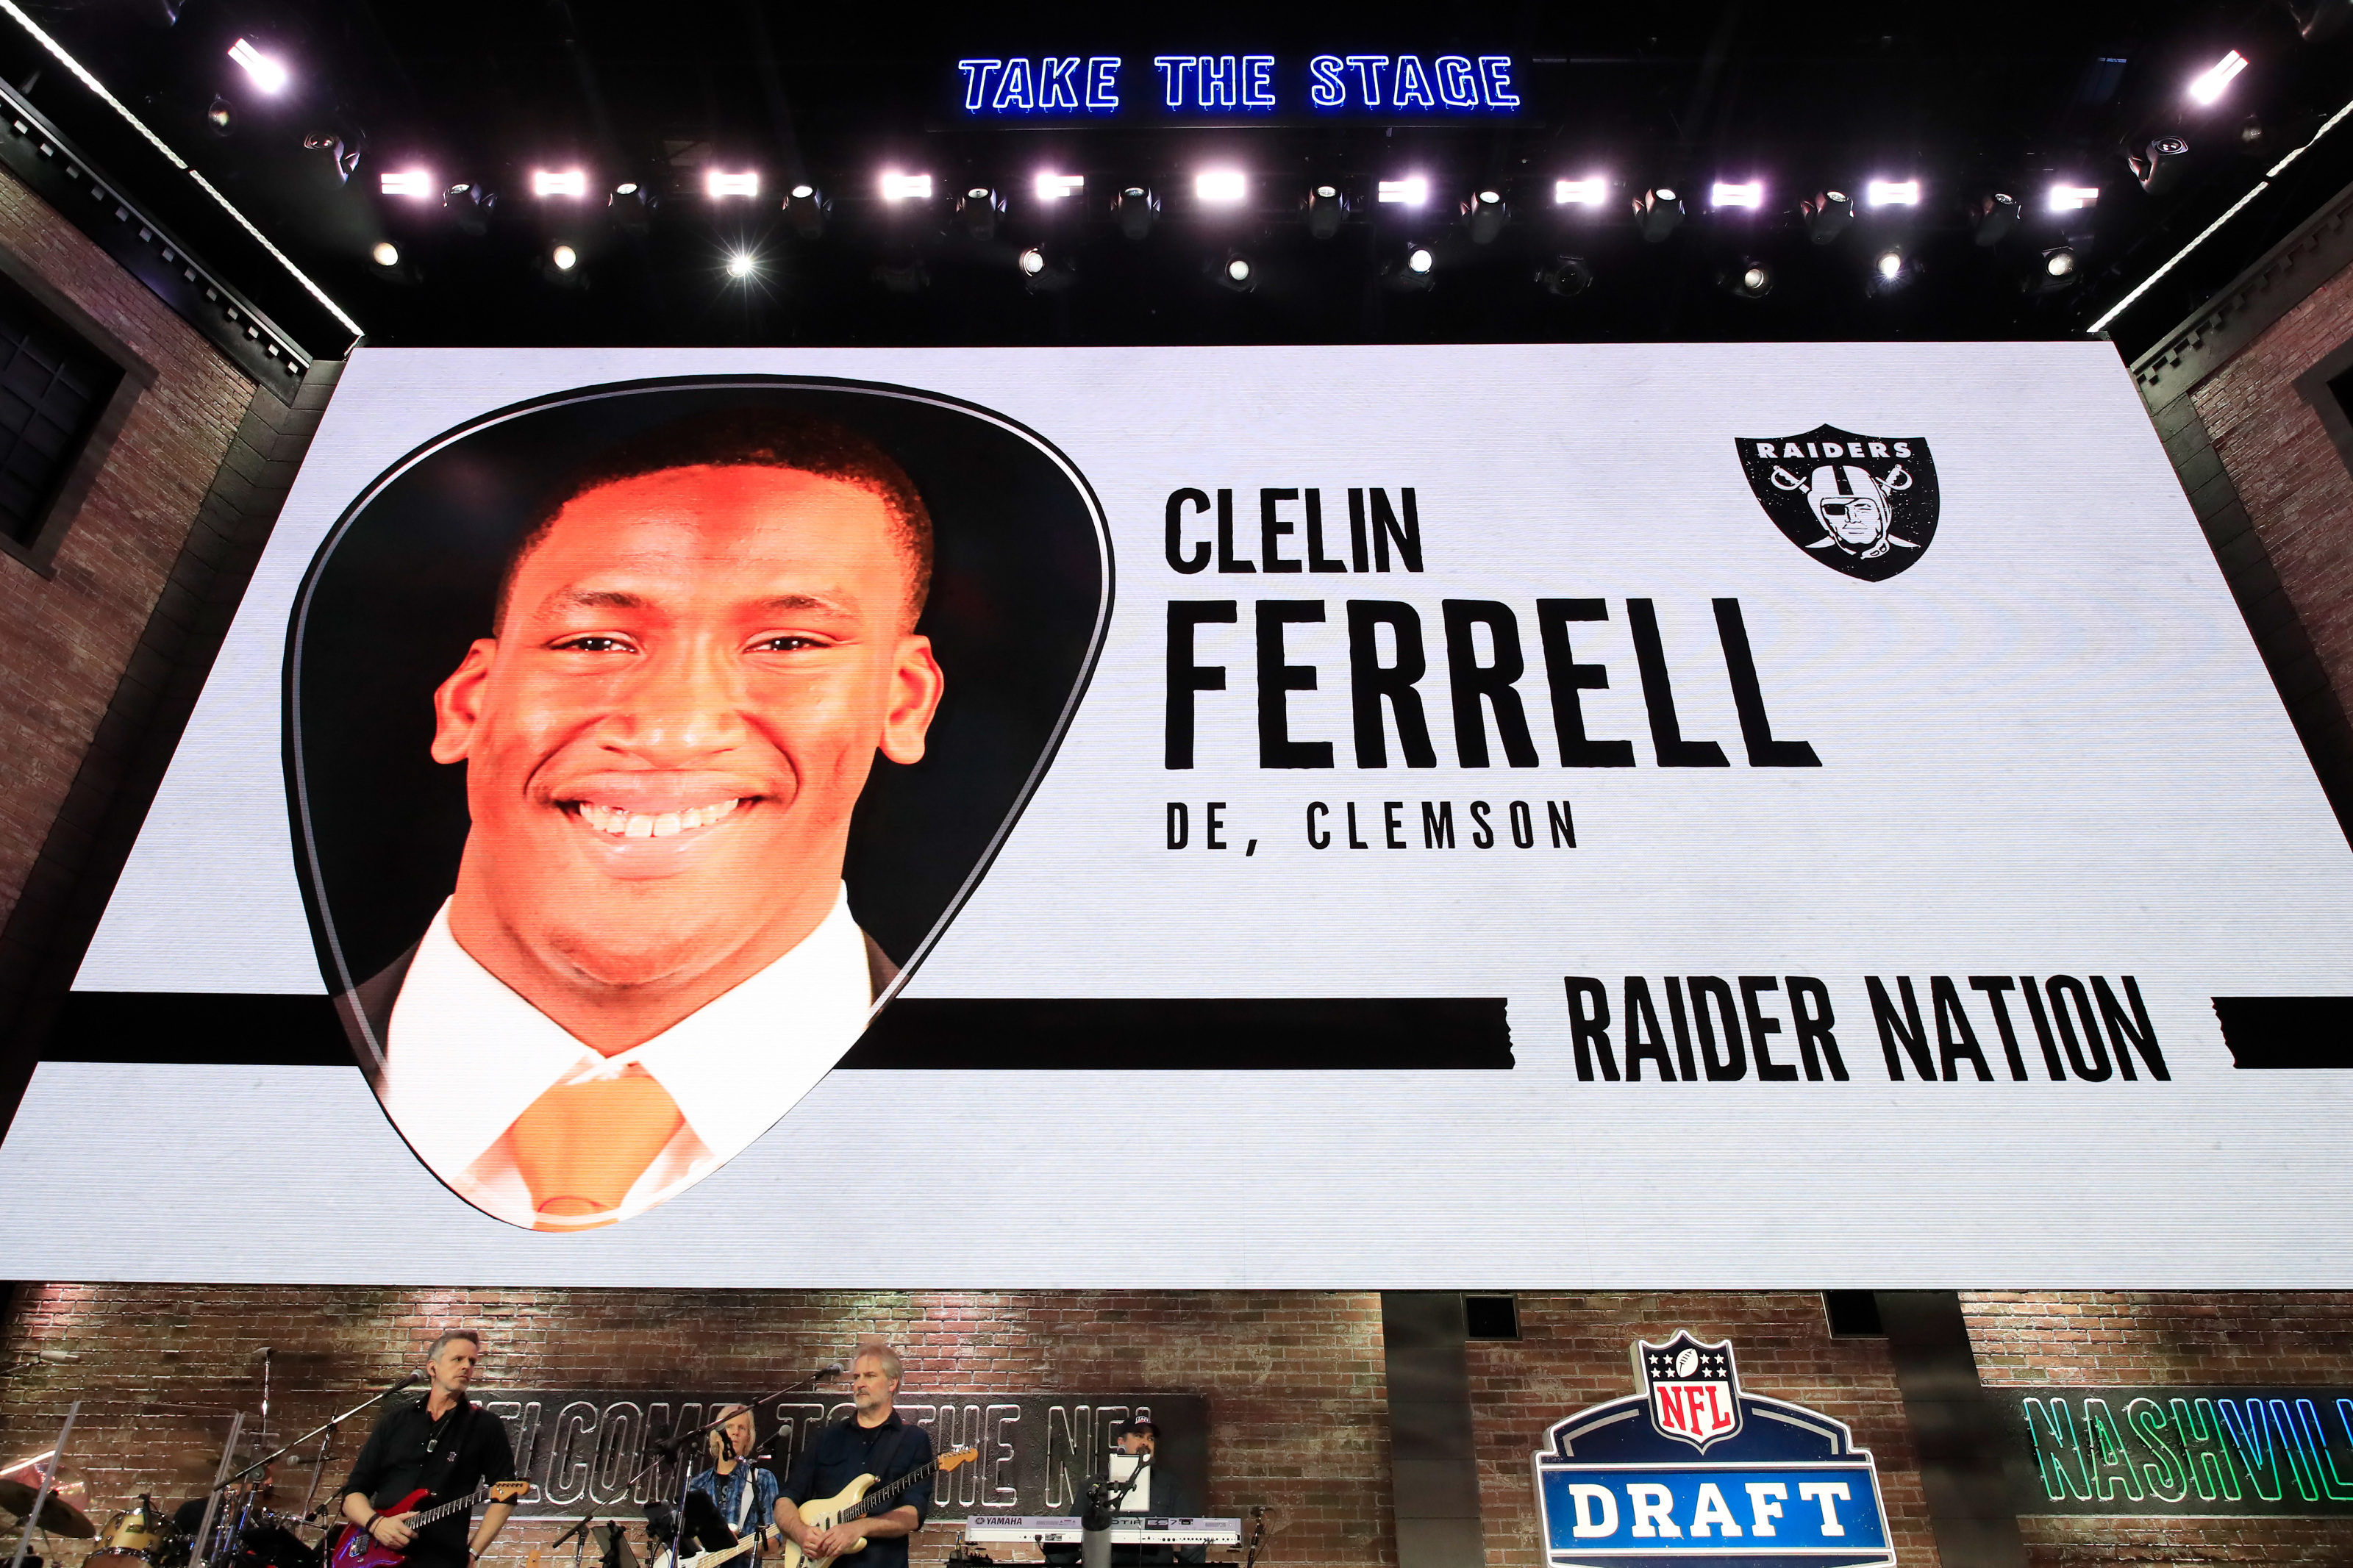 Oakland Raiders select Clelin Ferrell at No. 4 overall